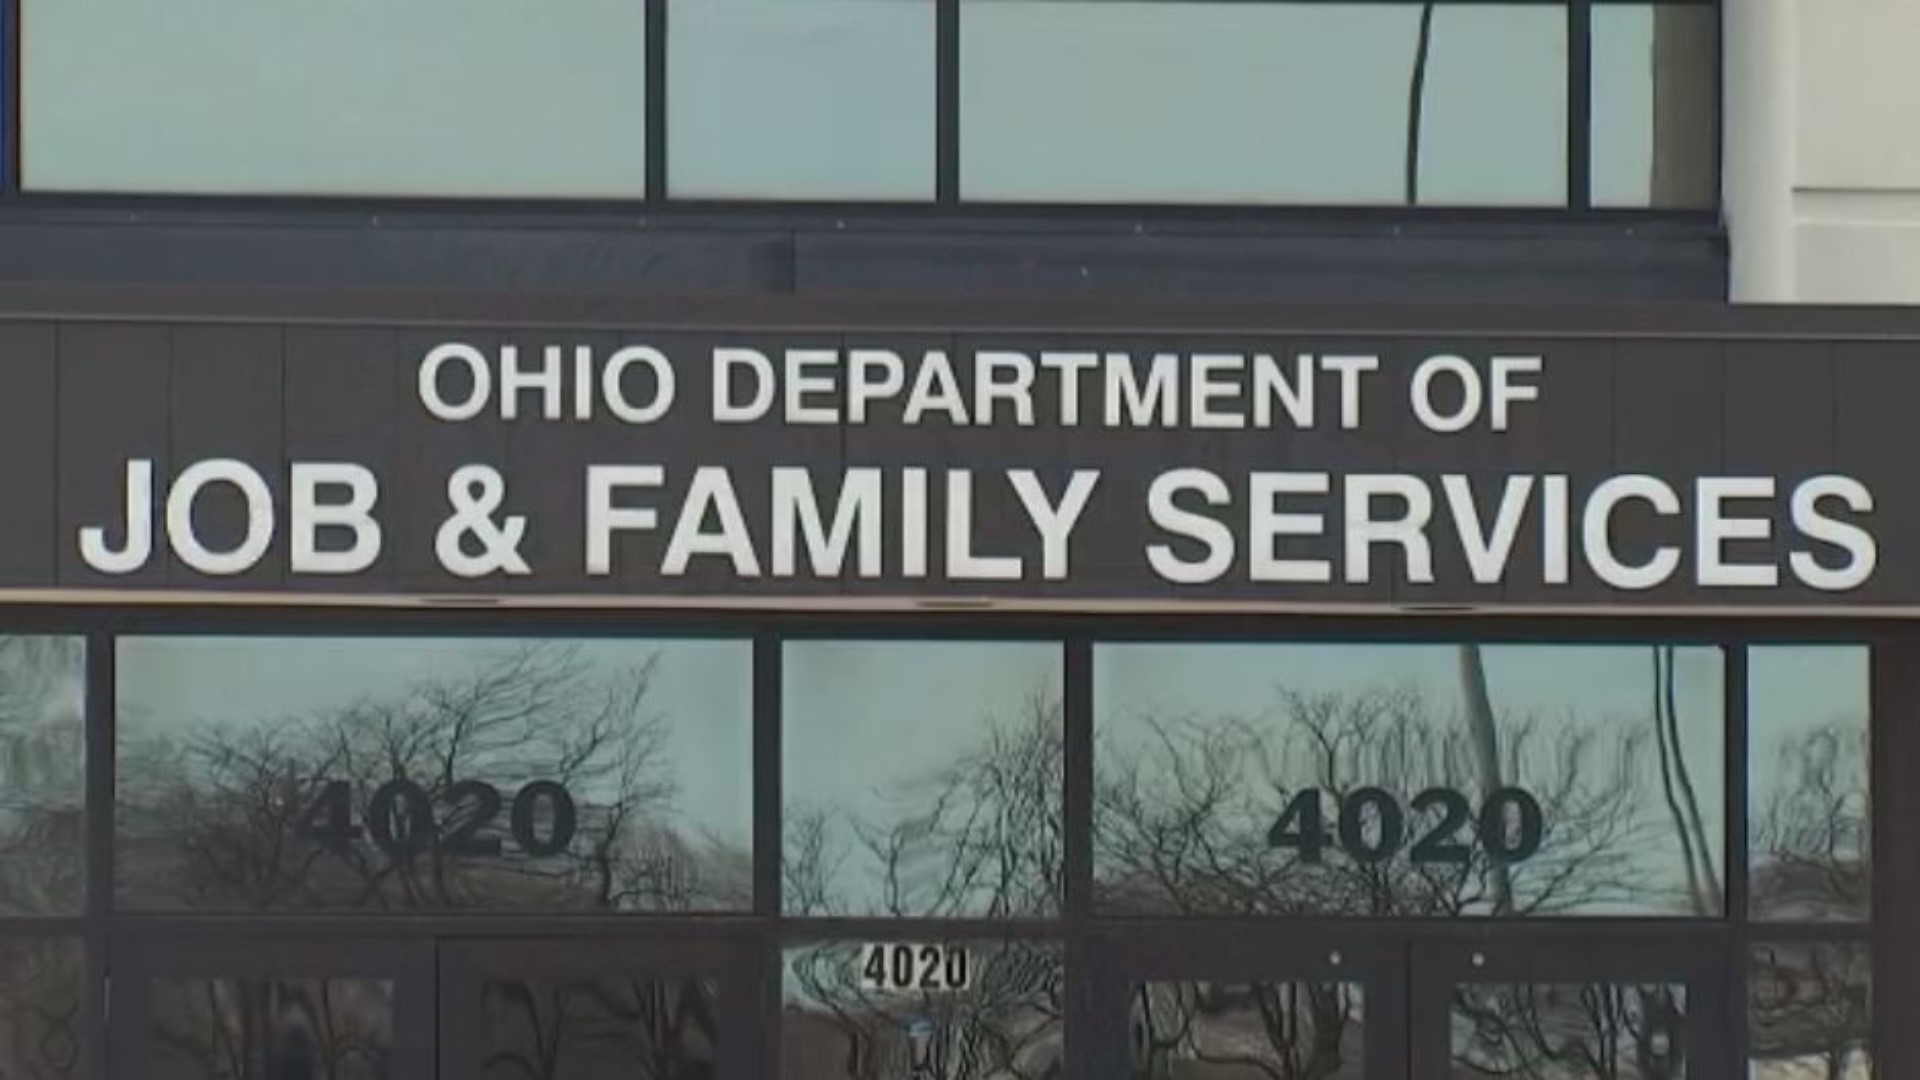 Investigators also found that the employee had accessed her own unemployment claim four times during her employment with ODJFS without a legitimate business purpose.